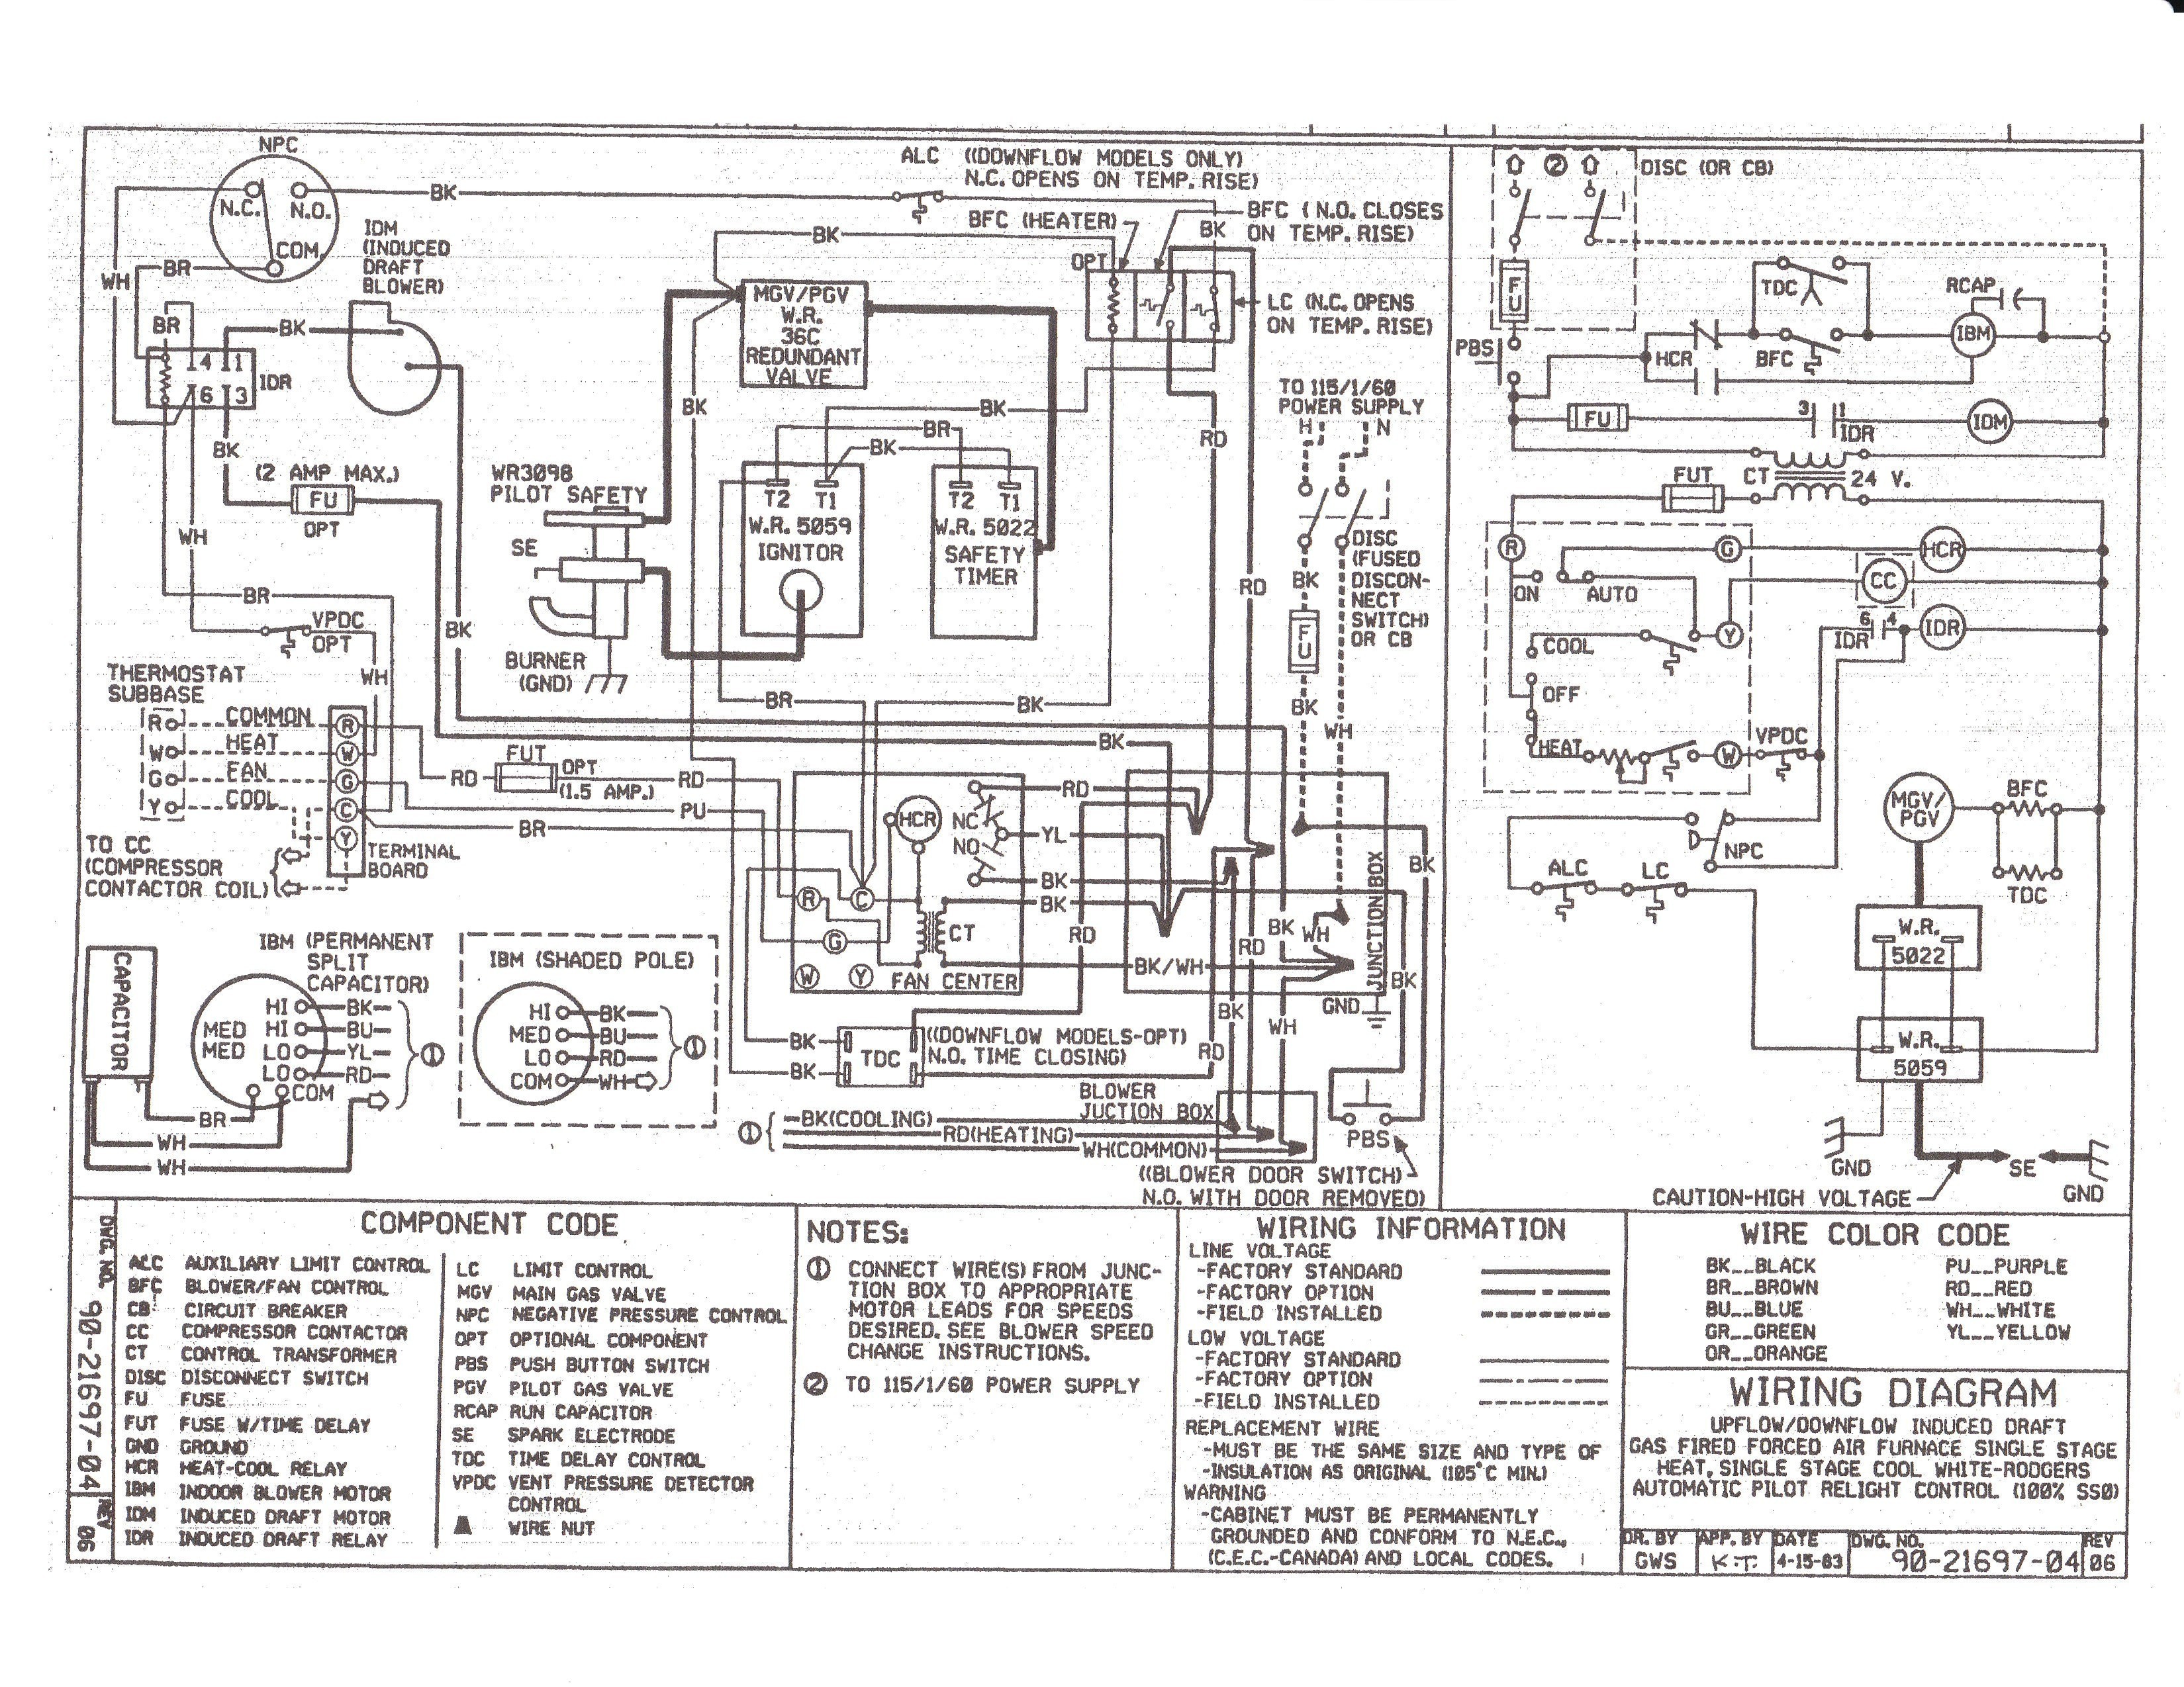 Wiring Diagram for York Air Conditioner New Wiring Diagram Ac York Save Mcquay Air Conditioner Wiring